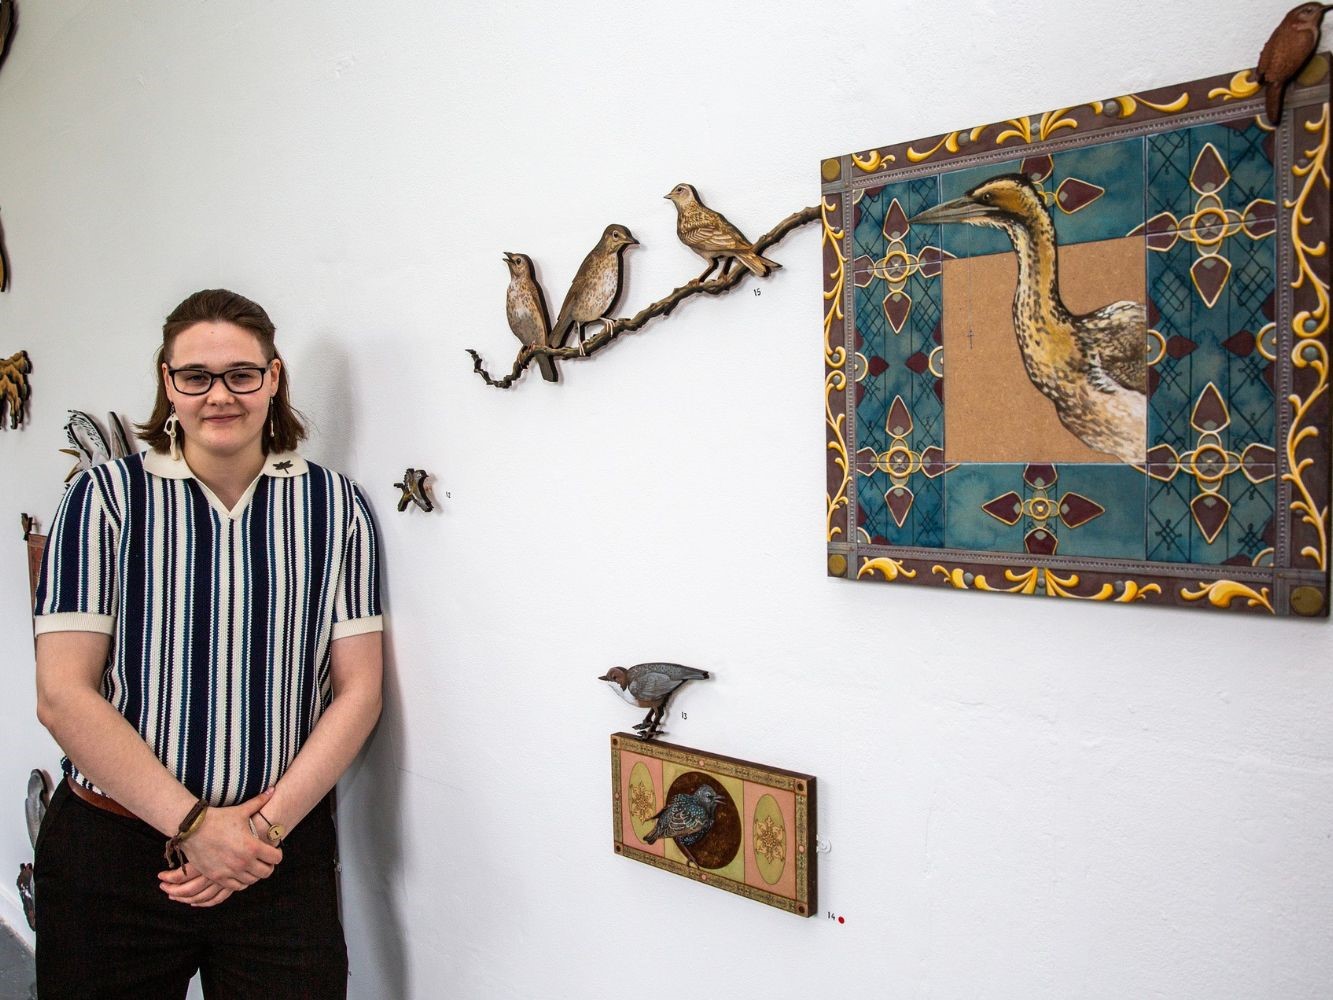 Fionnlagh-Fionn-Skinner-he-or-him-Highly-Commended-RGU-Art--Heritage-Purchase-Prize-Award-